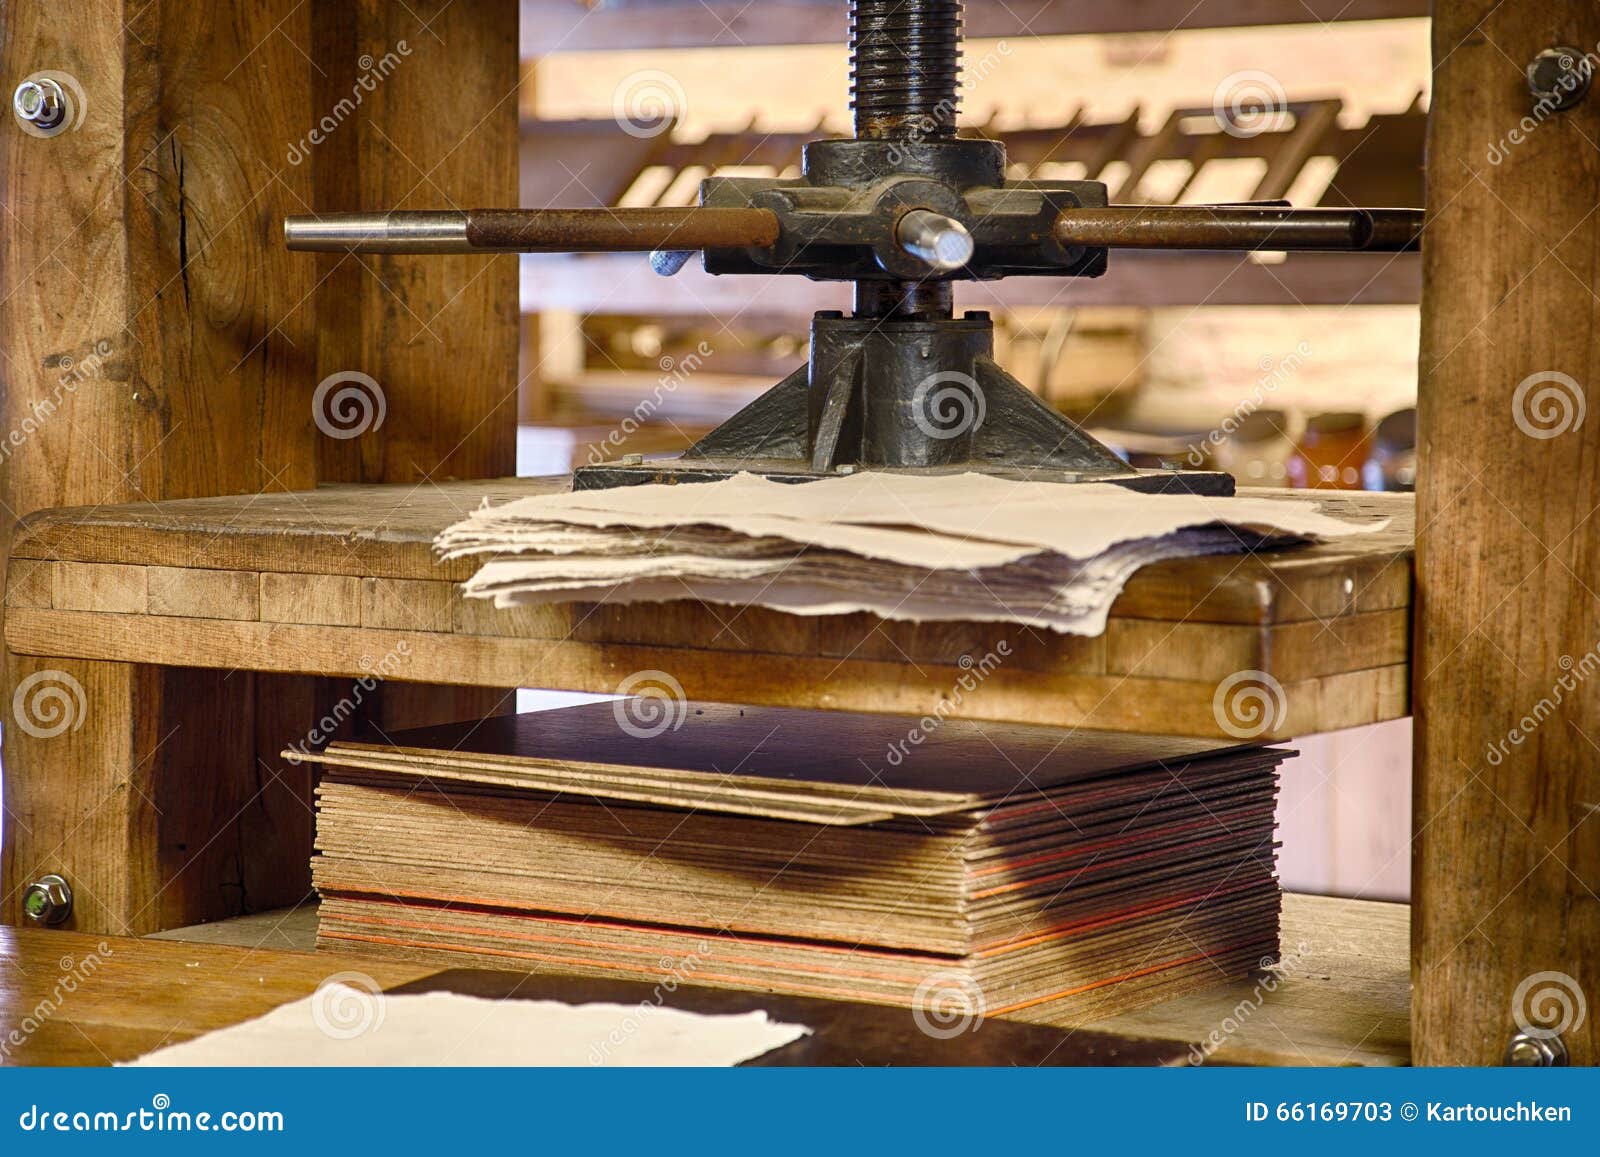 Old paper press stock image. Image of offset, ancient - 66169703